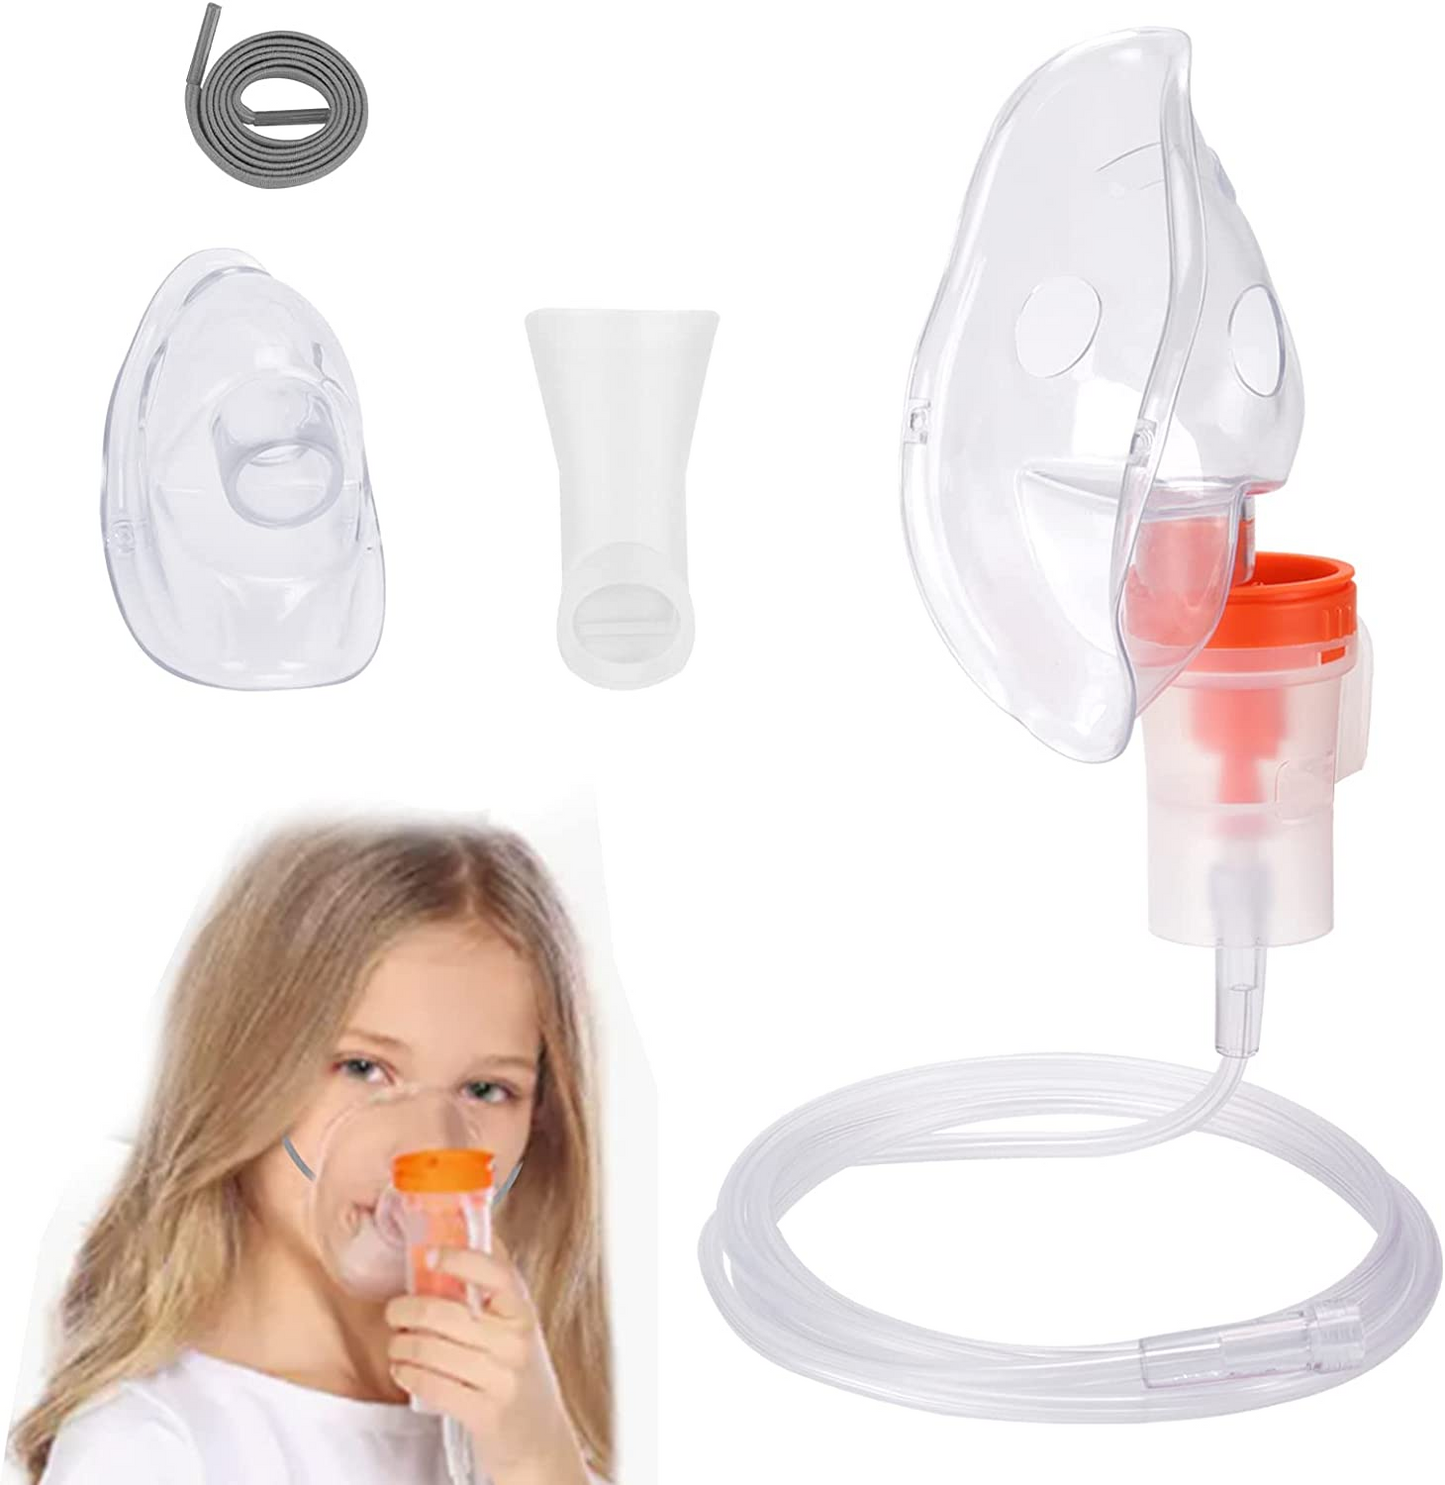 Compressor Nebulizer Machine with Mouthpiece and Mask for Adults and Children